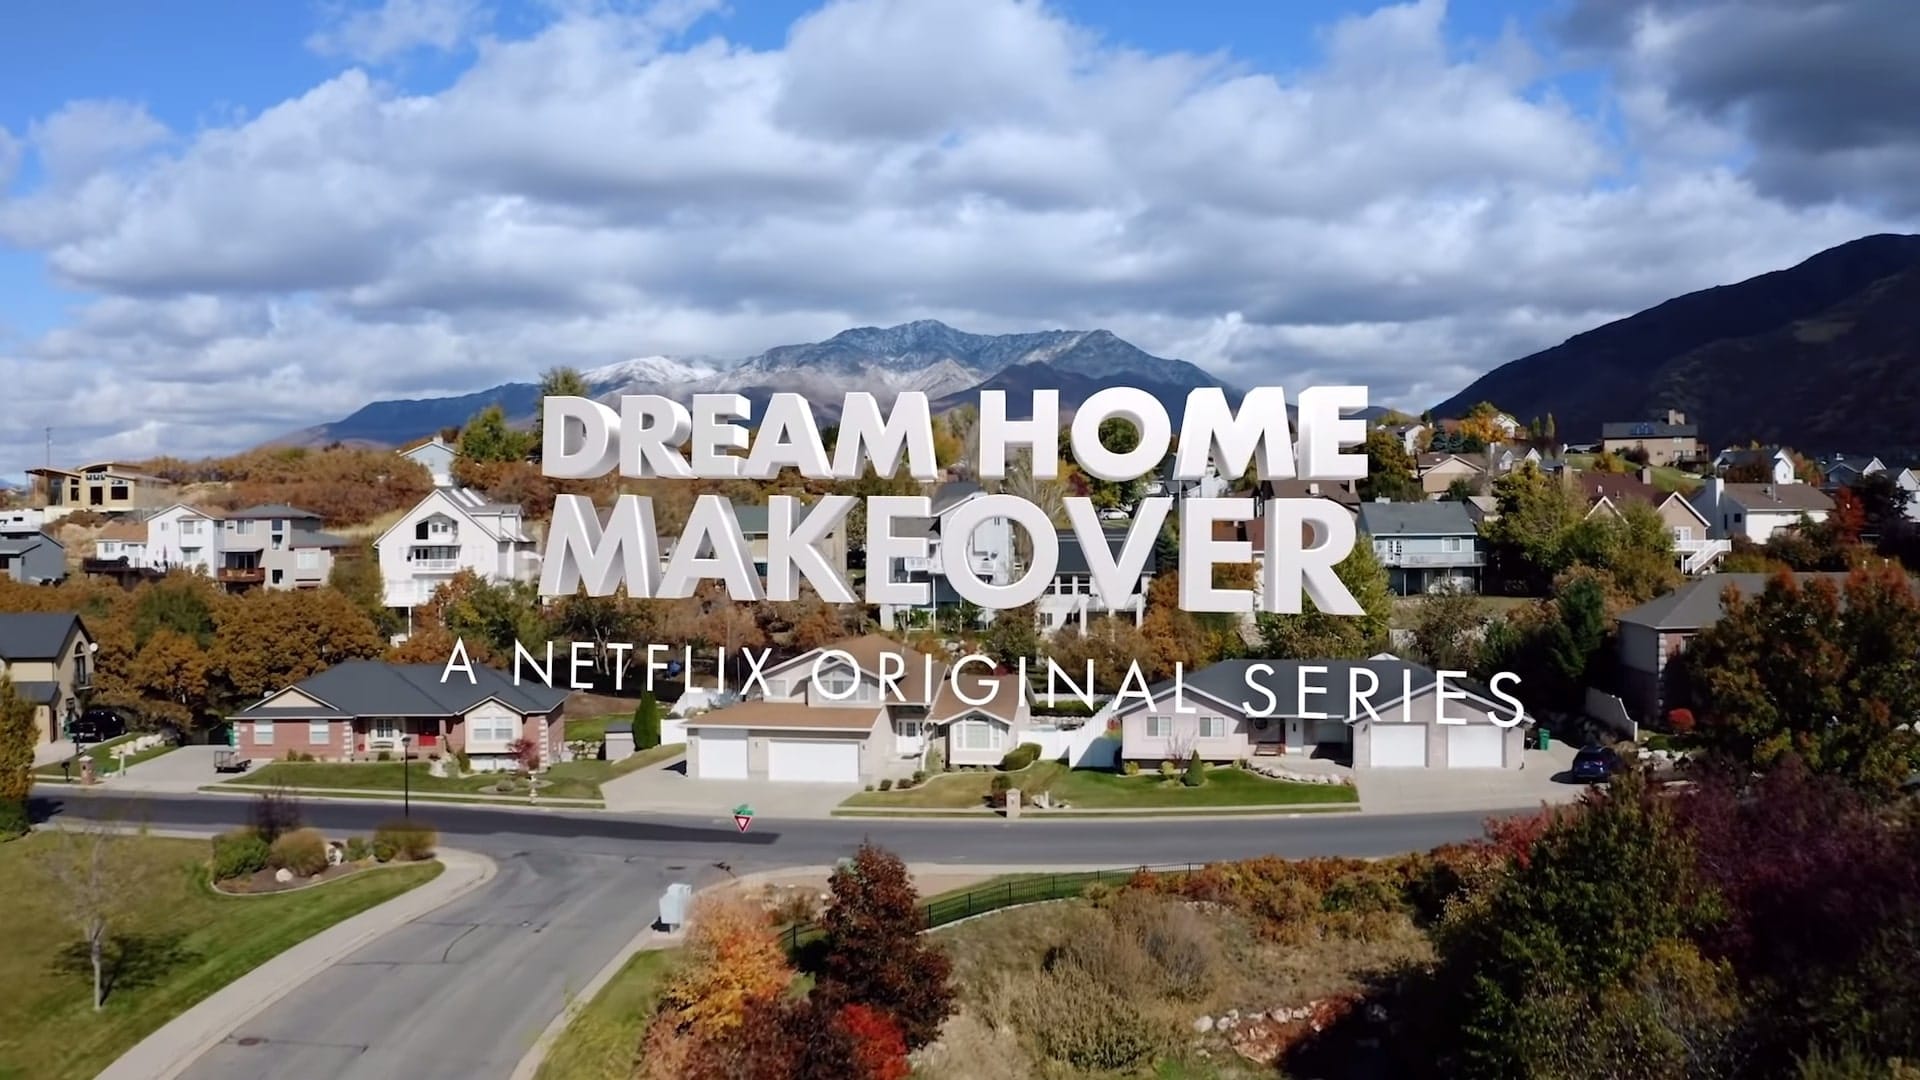 🎬 Dream Home Makeover [TRAILER] Coming to Netflix October 16, 2020 2